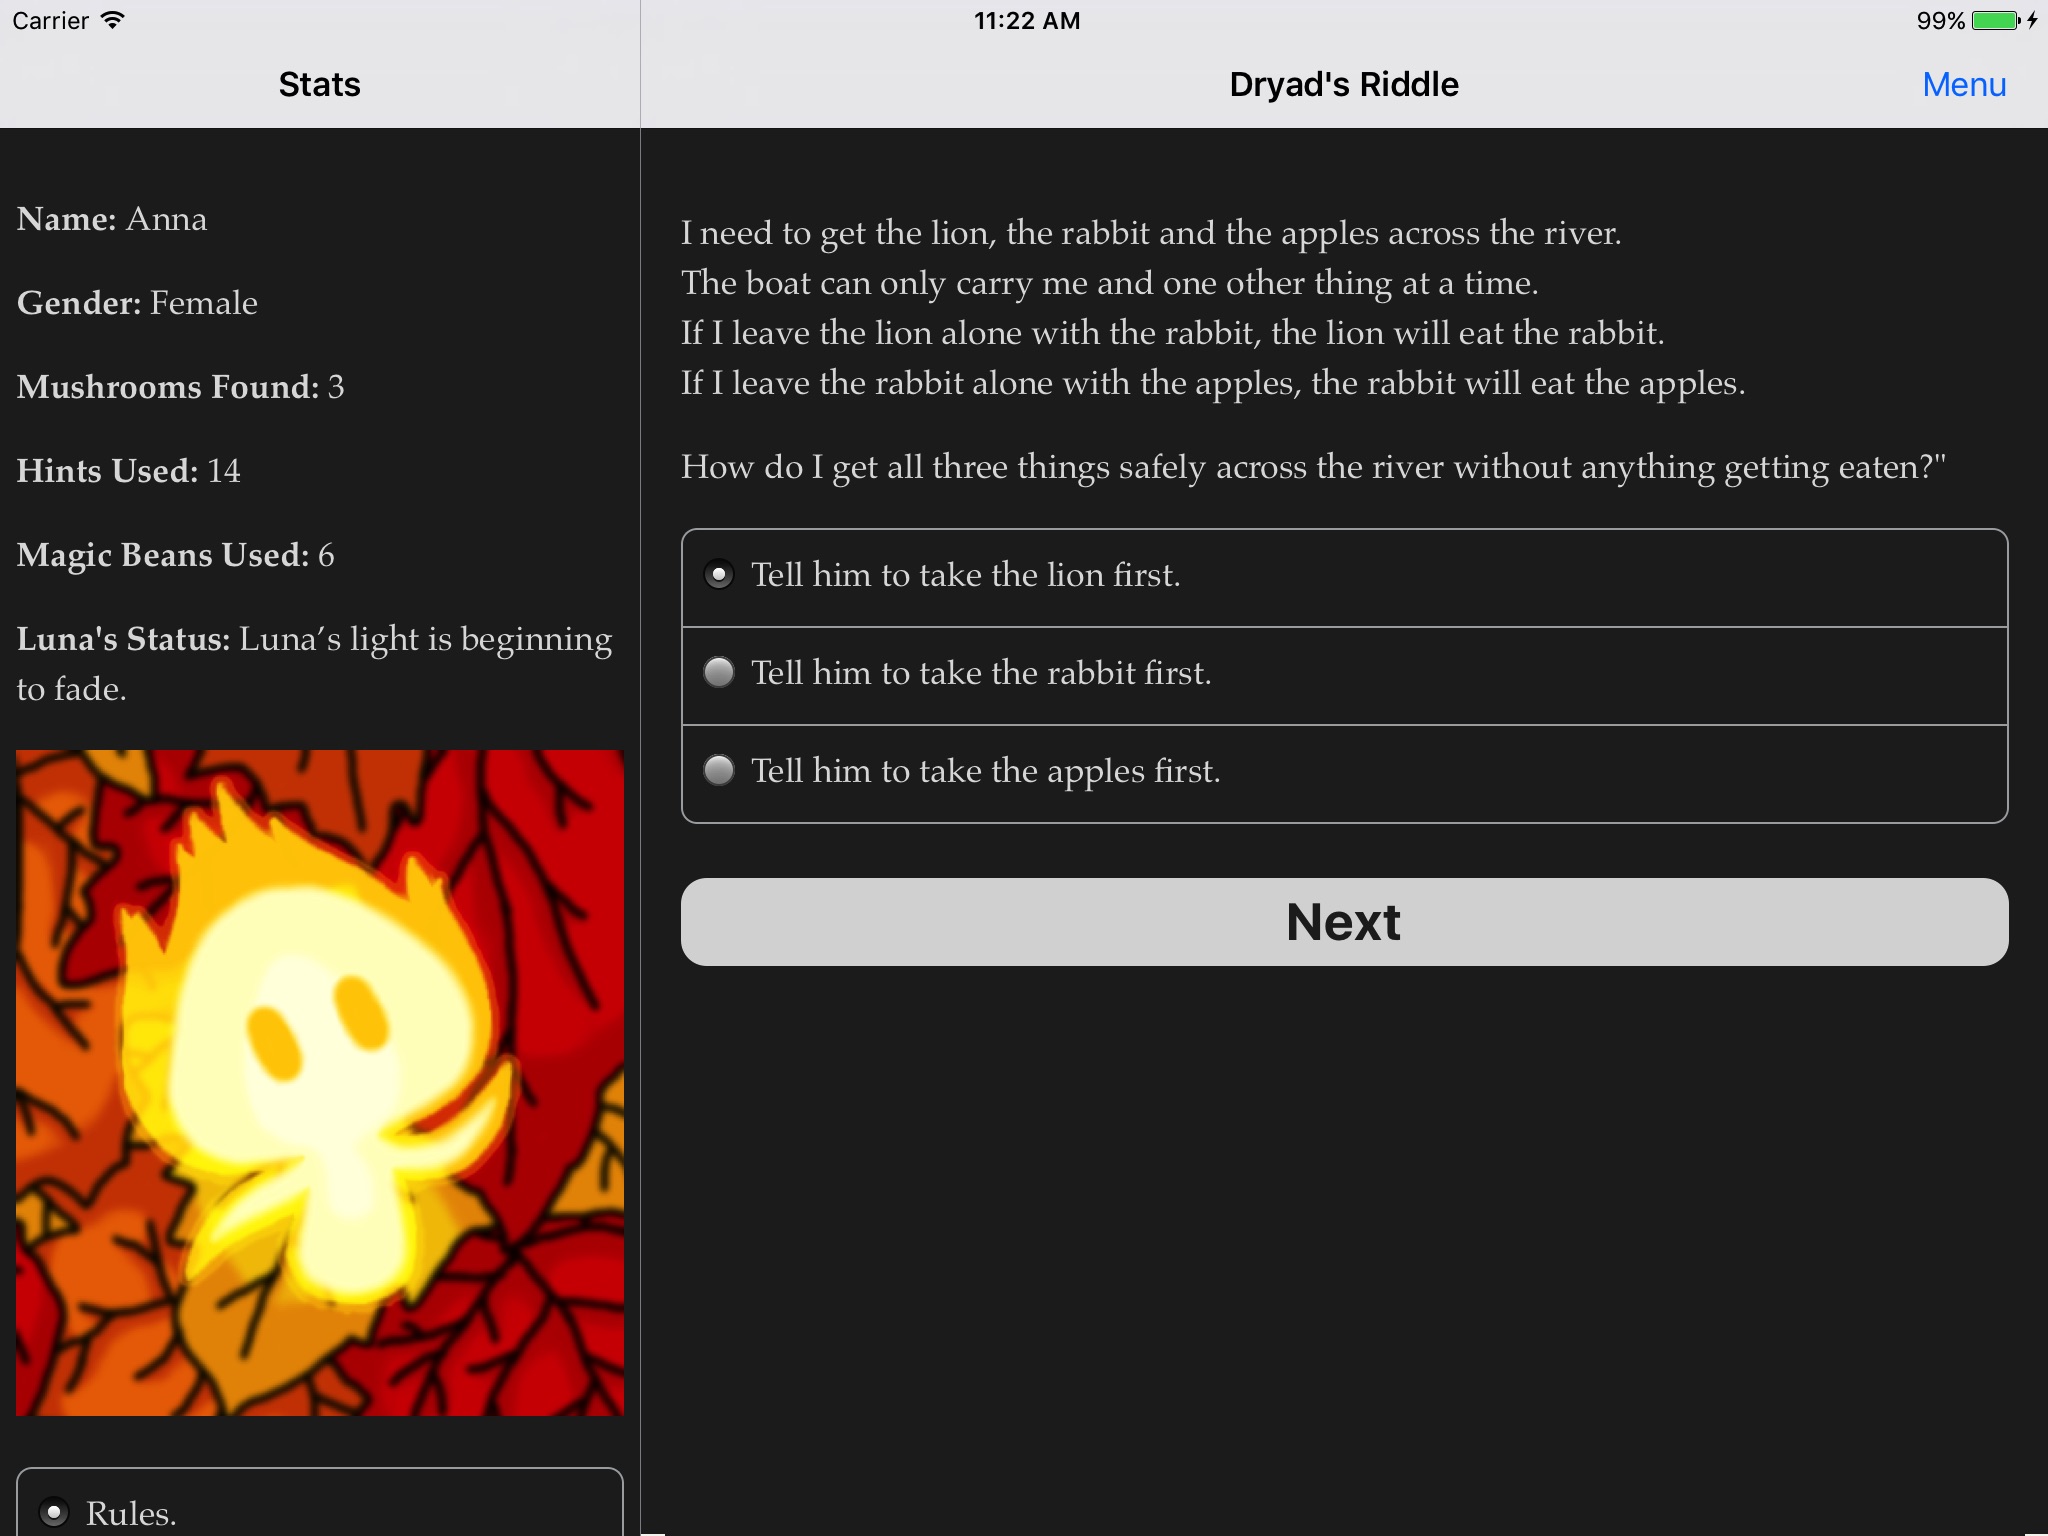 The Dryad's Riddle screenshot 3